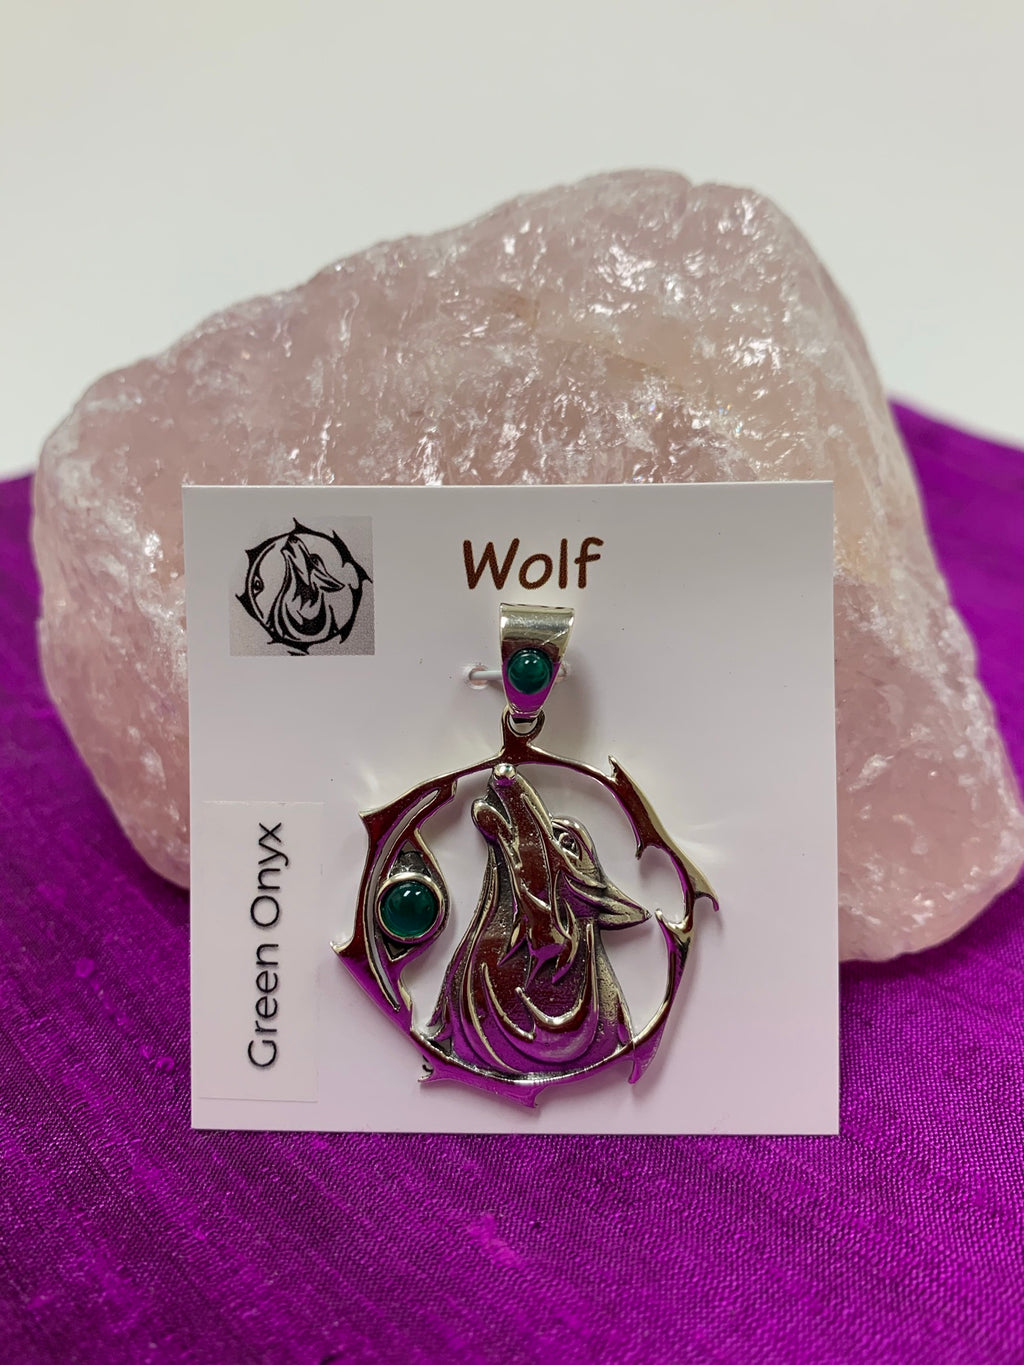 Sterling silver wolf spirit animal pendant. The sterling silver wolf is howling and consists of the head, neck and part of the body. It is inside of a stylized sterling circle and has two green onyx gemstones (cabs), one on the actual pendant, beside the wolf, and one on the pendant's bail. Wear this wolf symbol on your chest and carry its energy wherever you go. This is a pendant only - there is not a necklace chain included.